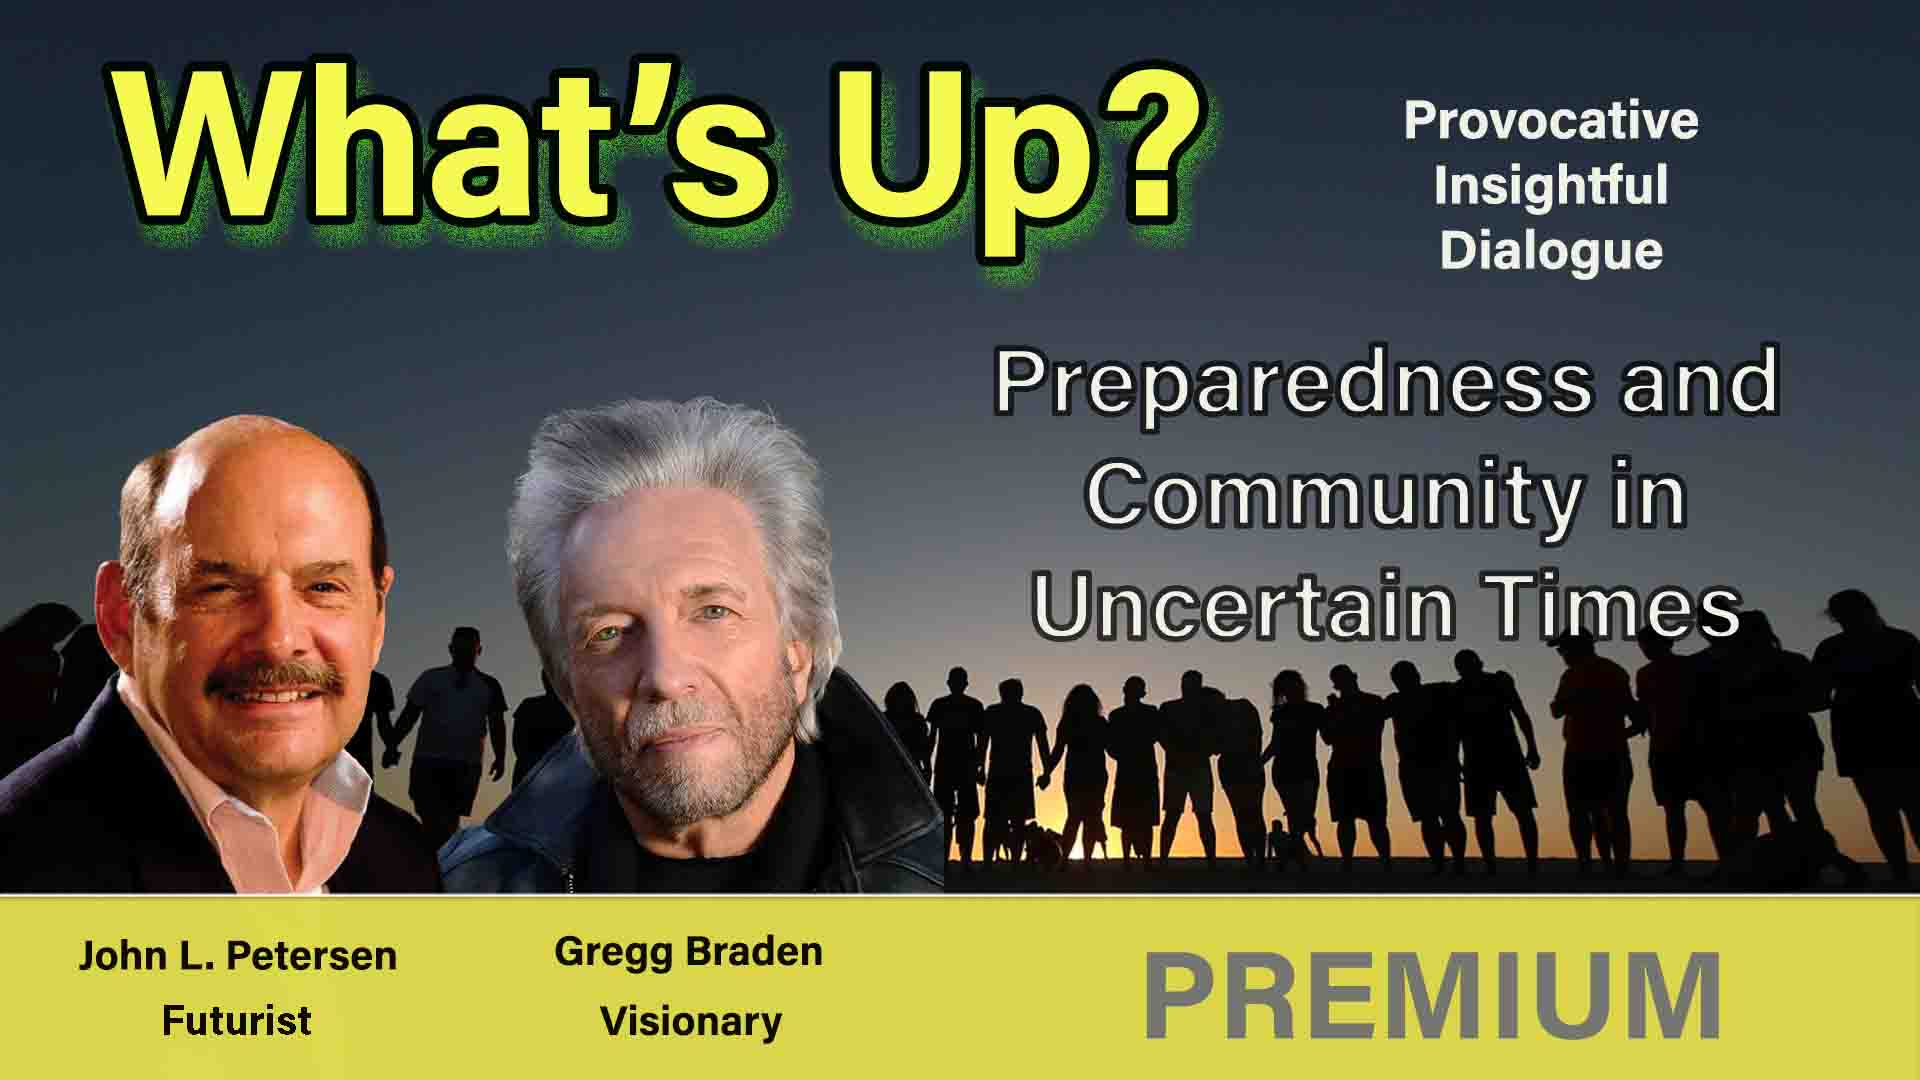 Greg Braden and John Petersen discuss the intentional dismantling of social bonds, including economic, gender, race, and religious divisions. They emphasize the erosion of religious foundations, the necessity of personal and community resilience, and the potential for a new, more aware and responsible human and world to emerge.